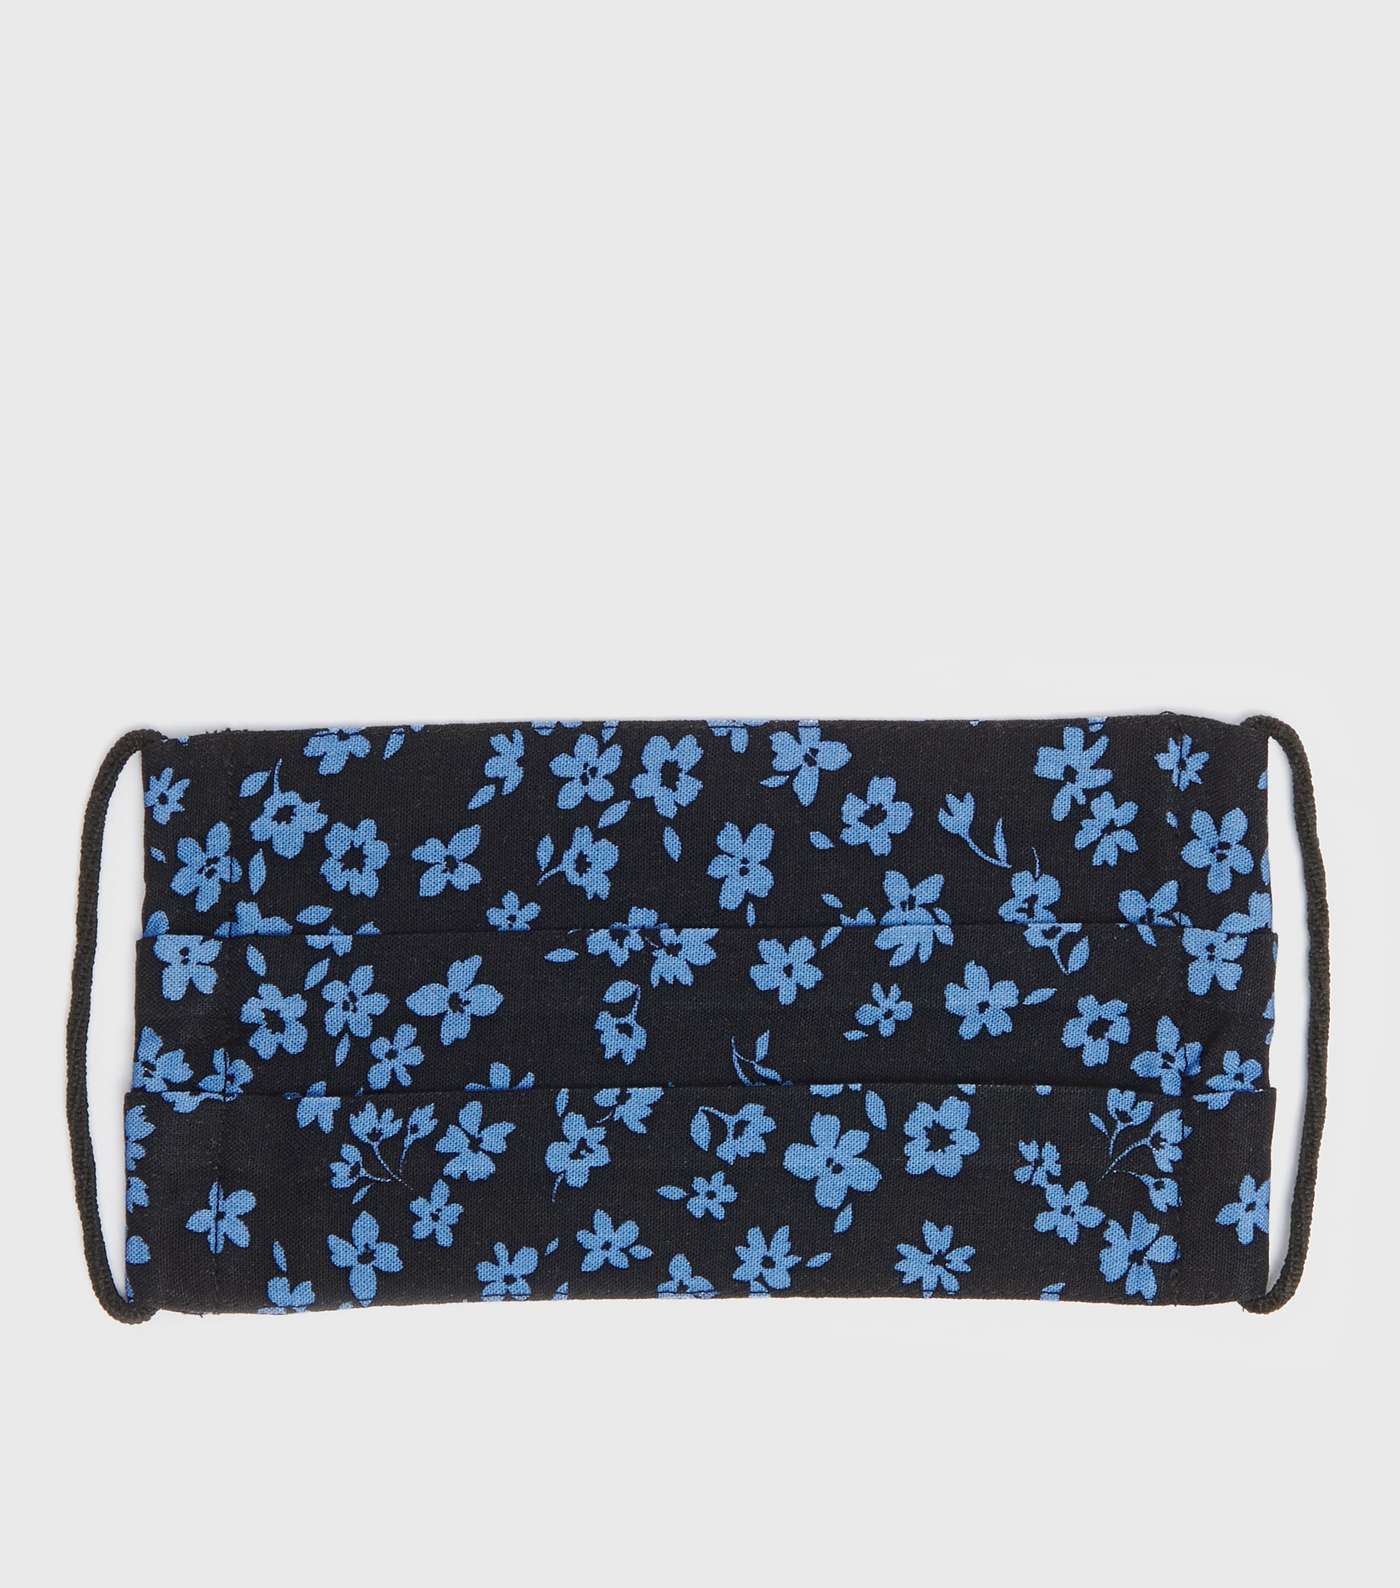 Girls Black Ditsy Floral Reusable Face Covering